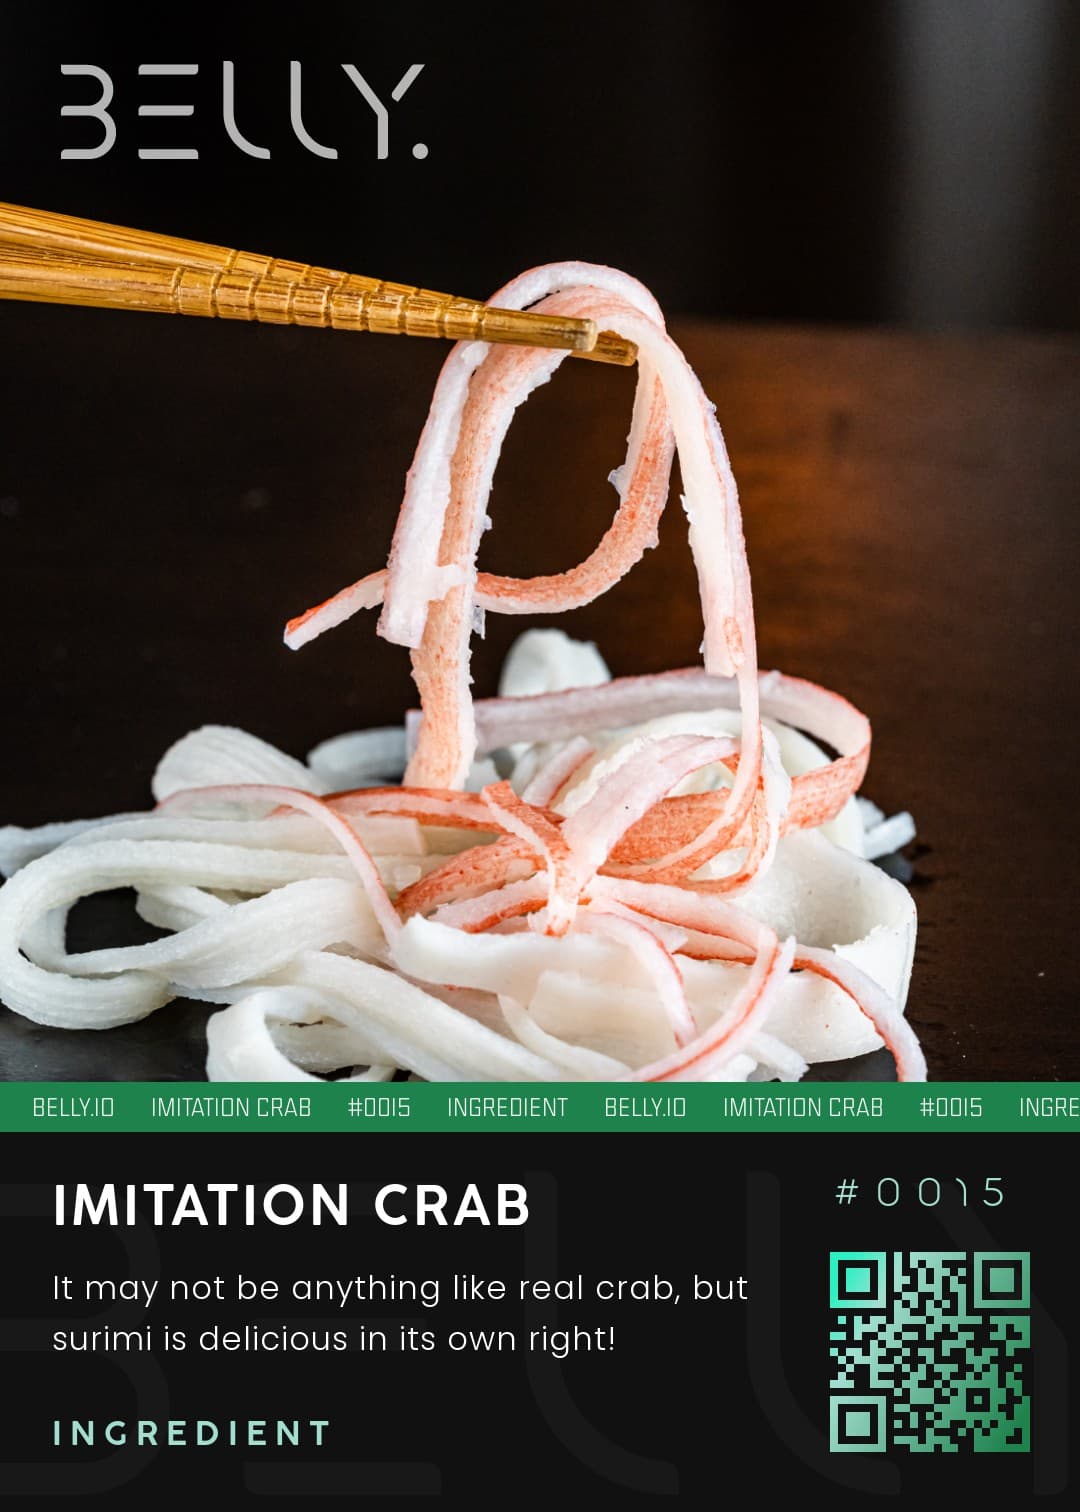 Imitation Crab - It may not be anything like real crab, but surimi is delicious in its own right!